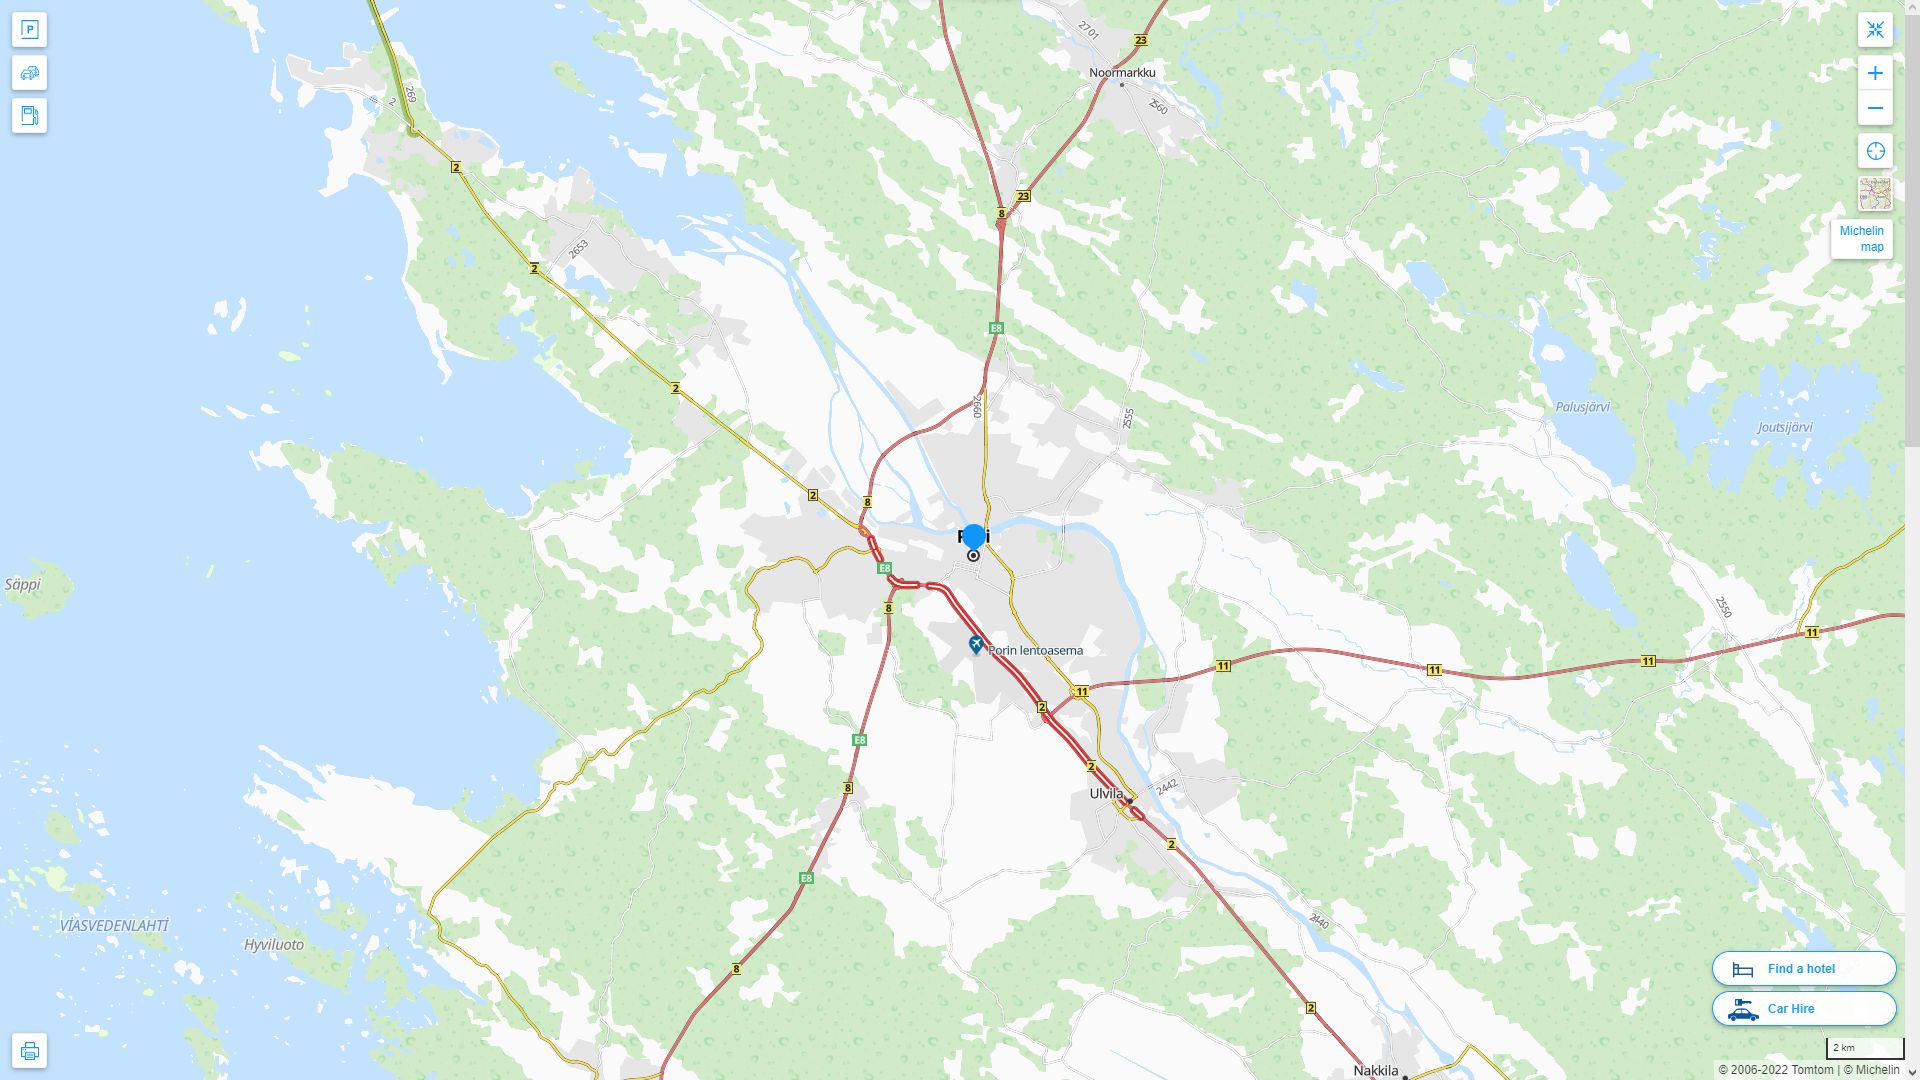 Pori Highway and Road Map